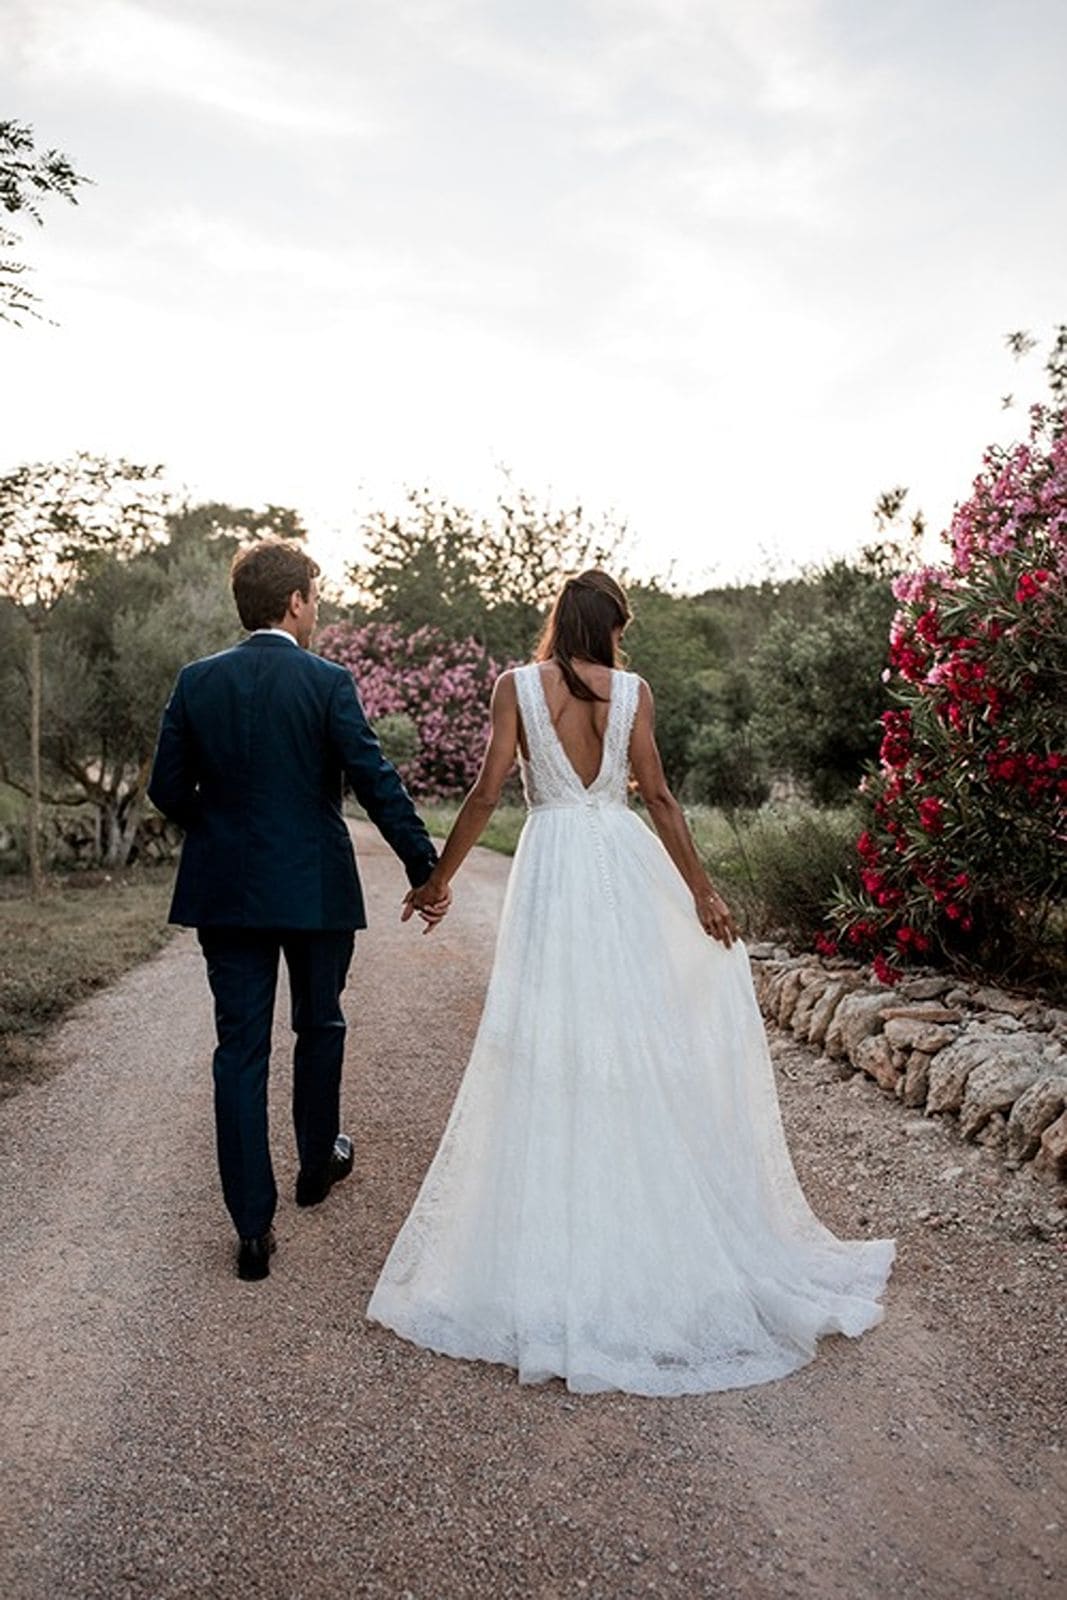 Bride and groom walk hand in hand after Ibiza wedding ceremony